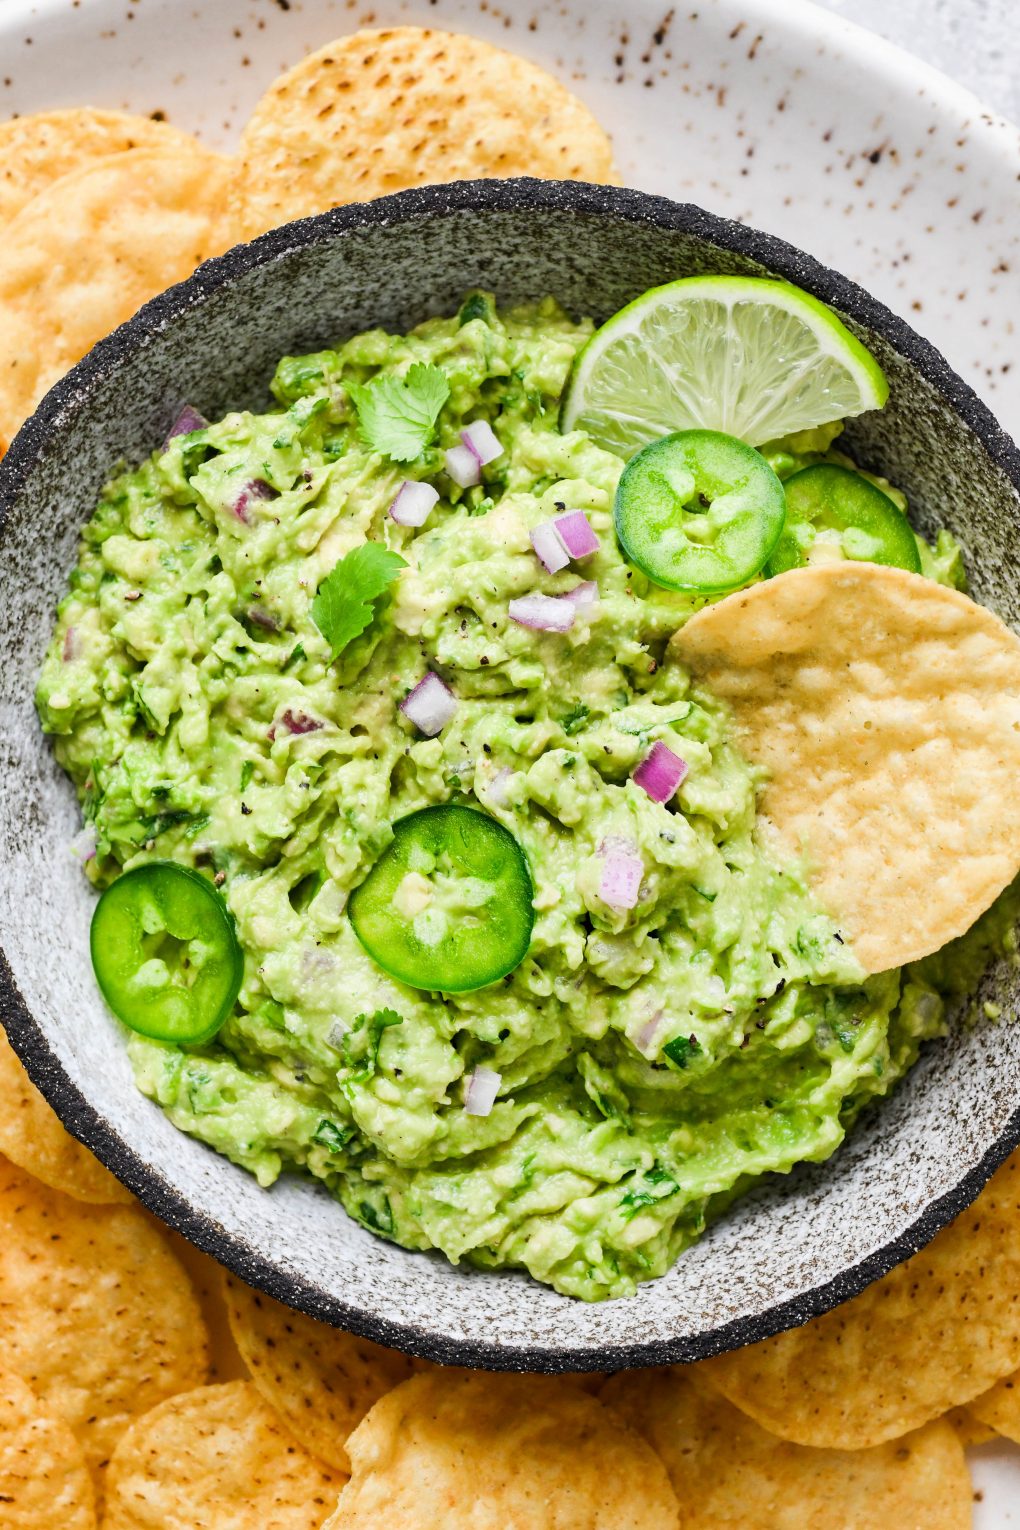 Overhead shot of a small bowl of bright green guacamole with a chip tucked into the side of the bowl. Guacamole is topped with some finely diced onion, thinly sliced jalapeño, and cilantro leaves, surrounded by round yellow tortilla chips. 